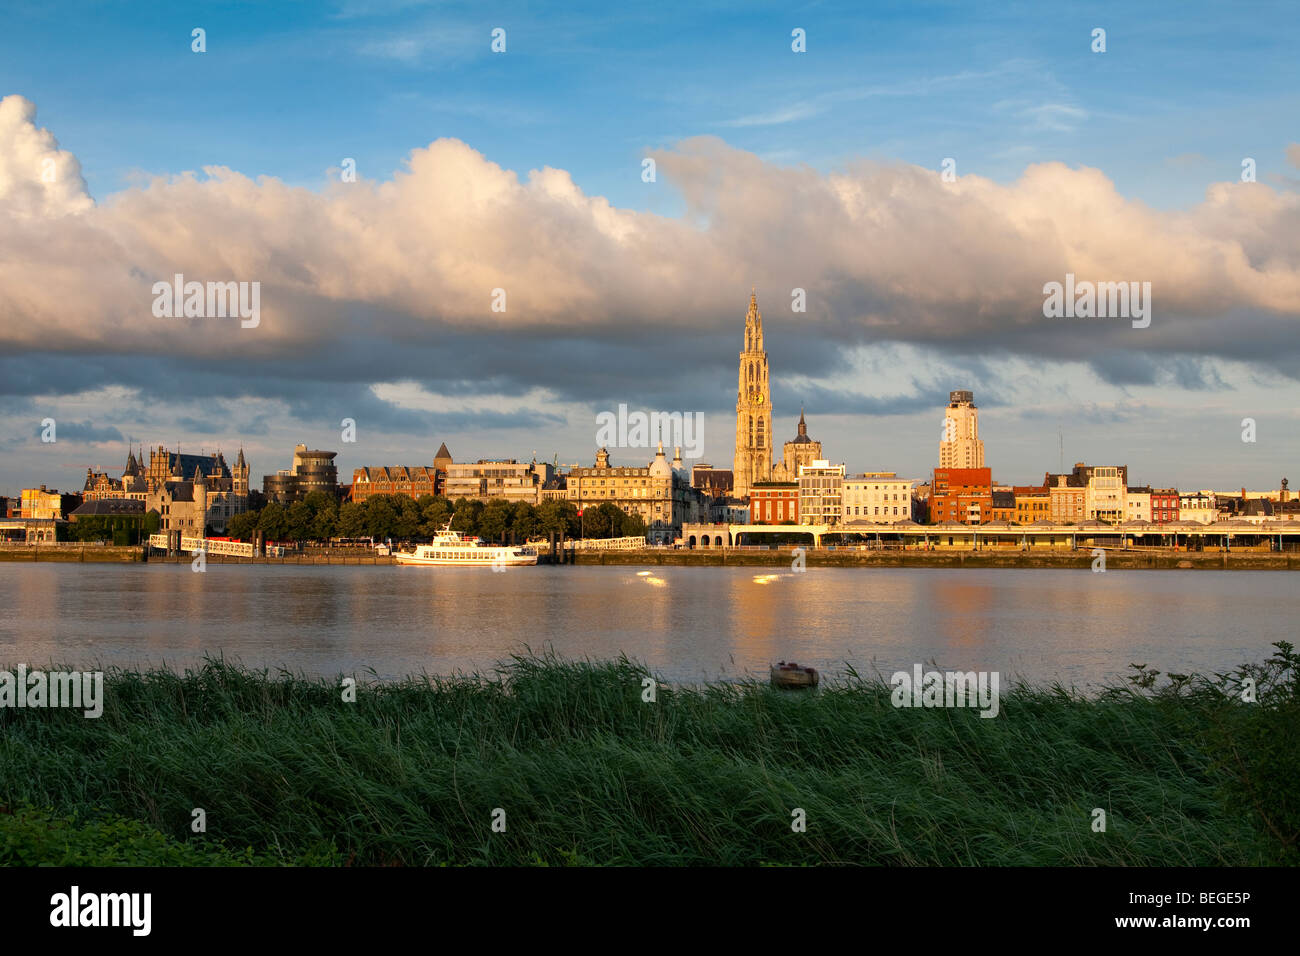 Antwerp Cathedral and city at sunset on bank of the River Schelde. Stock Photo